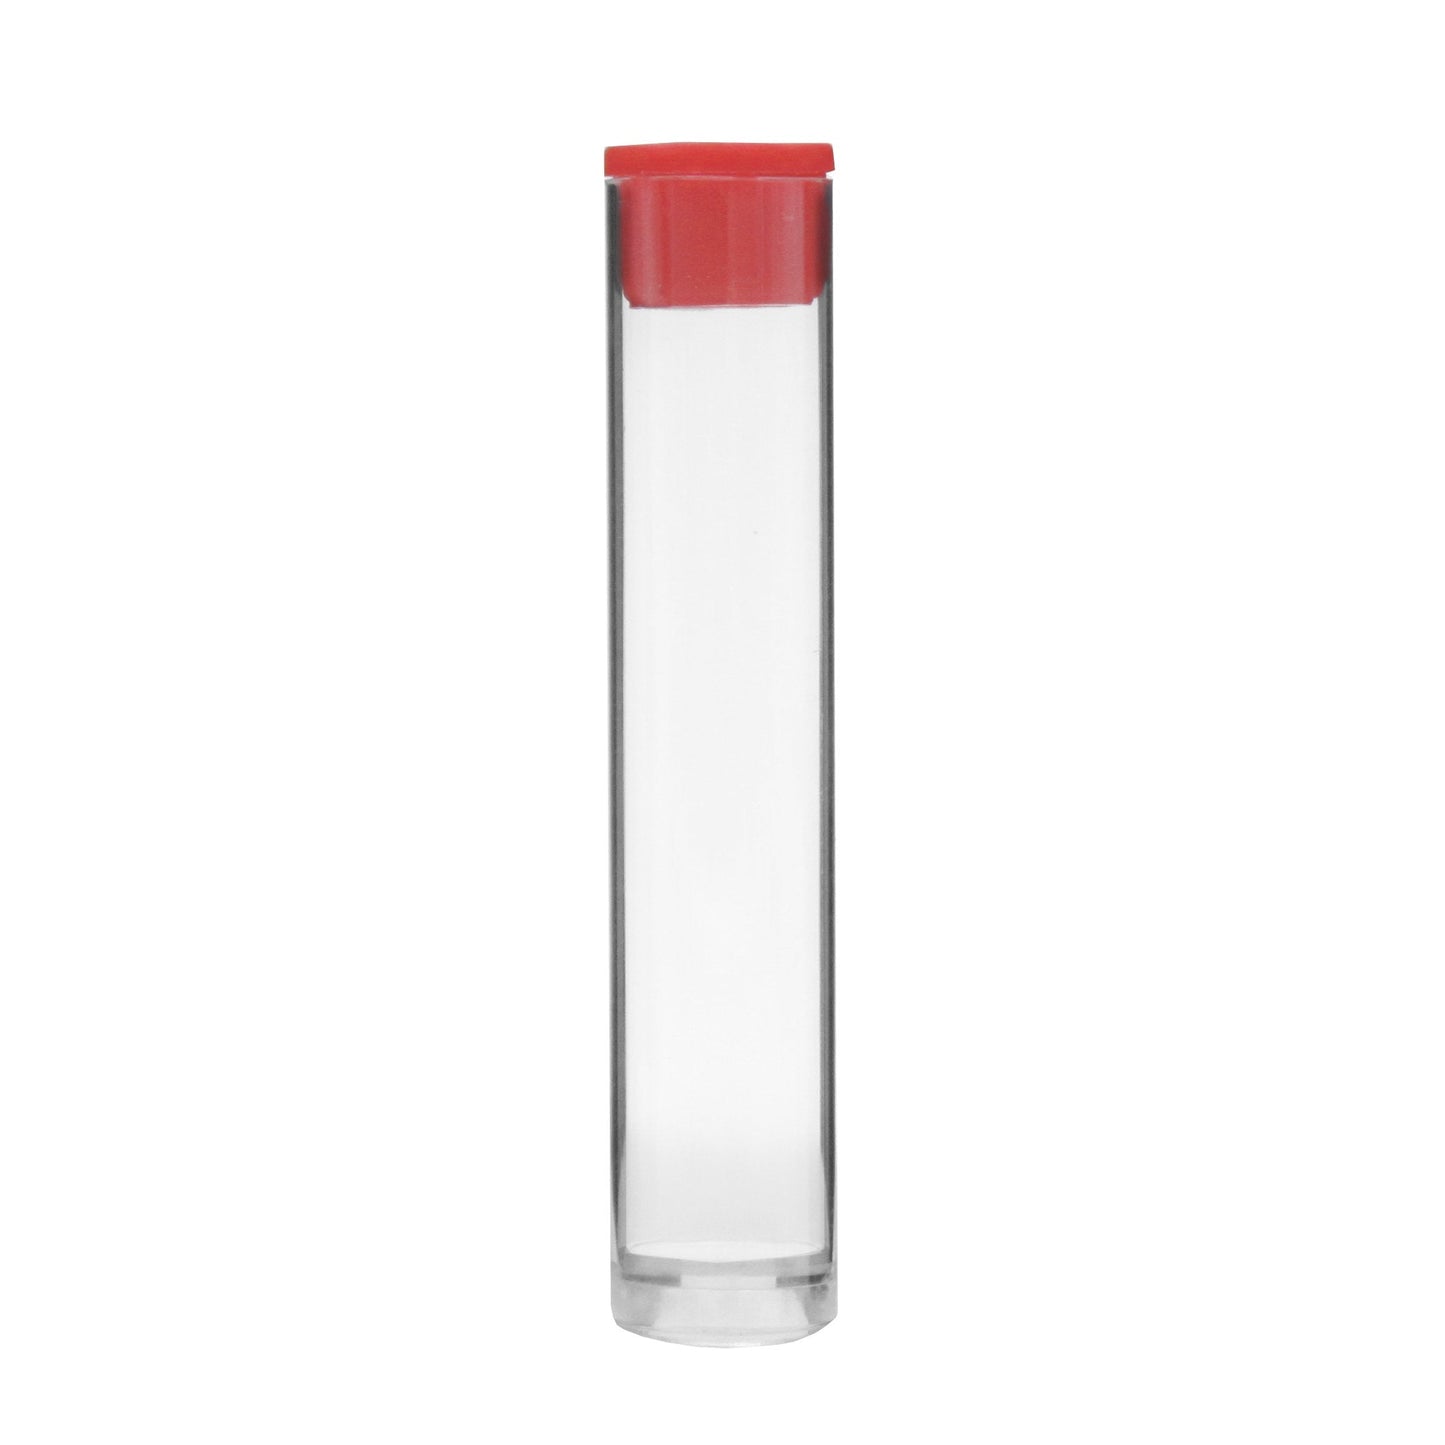 Plastic Tubes for Cartridges 12mm x 81mm Red